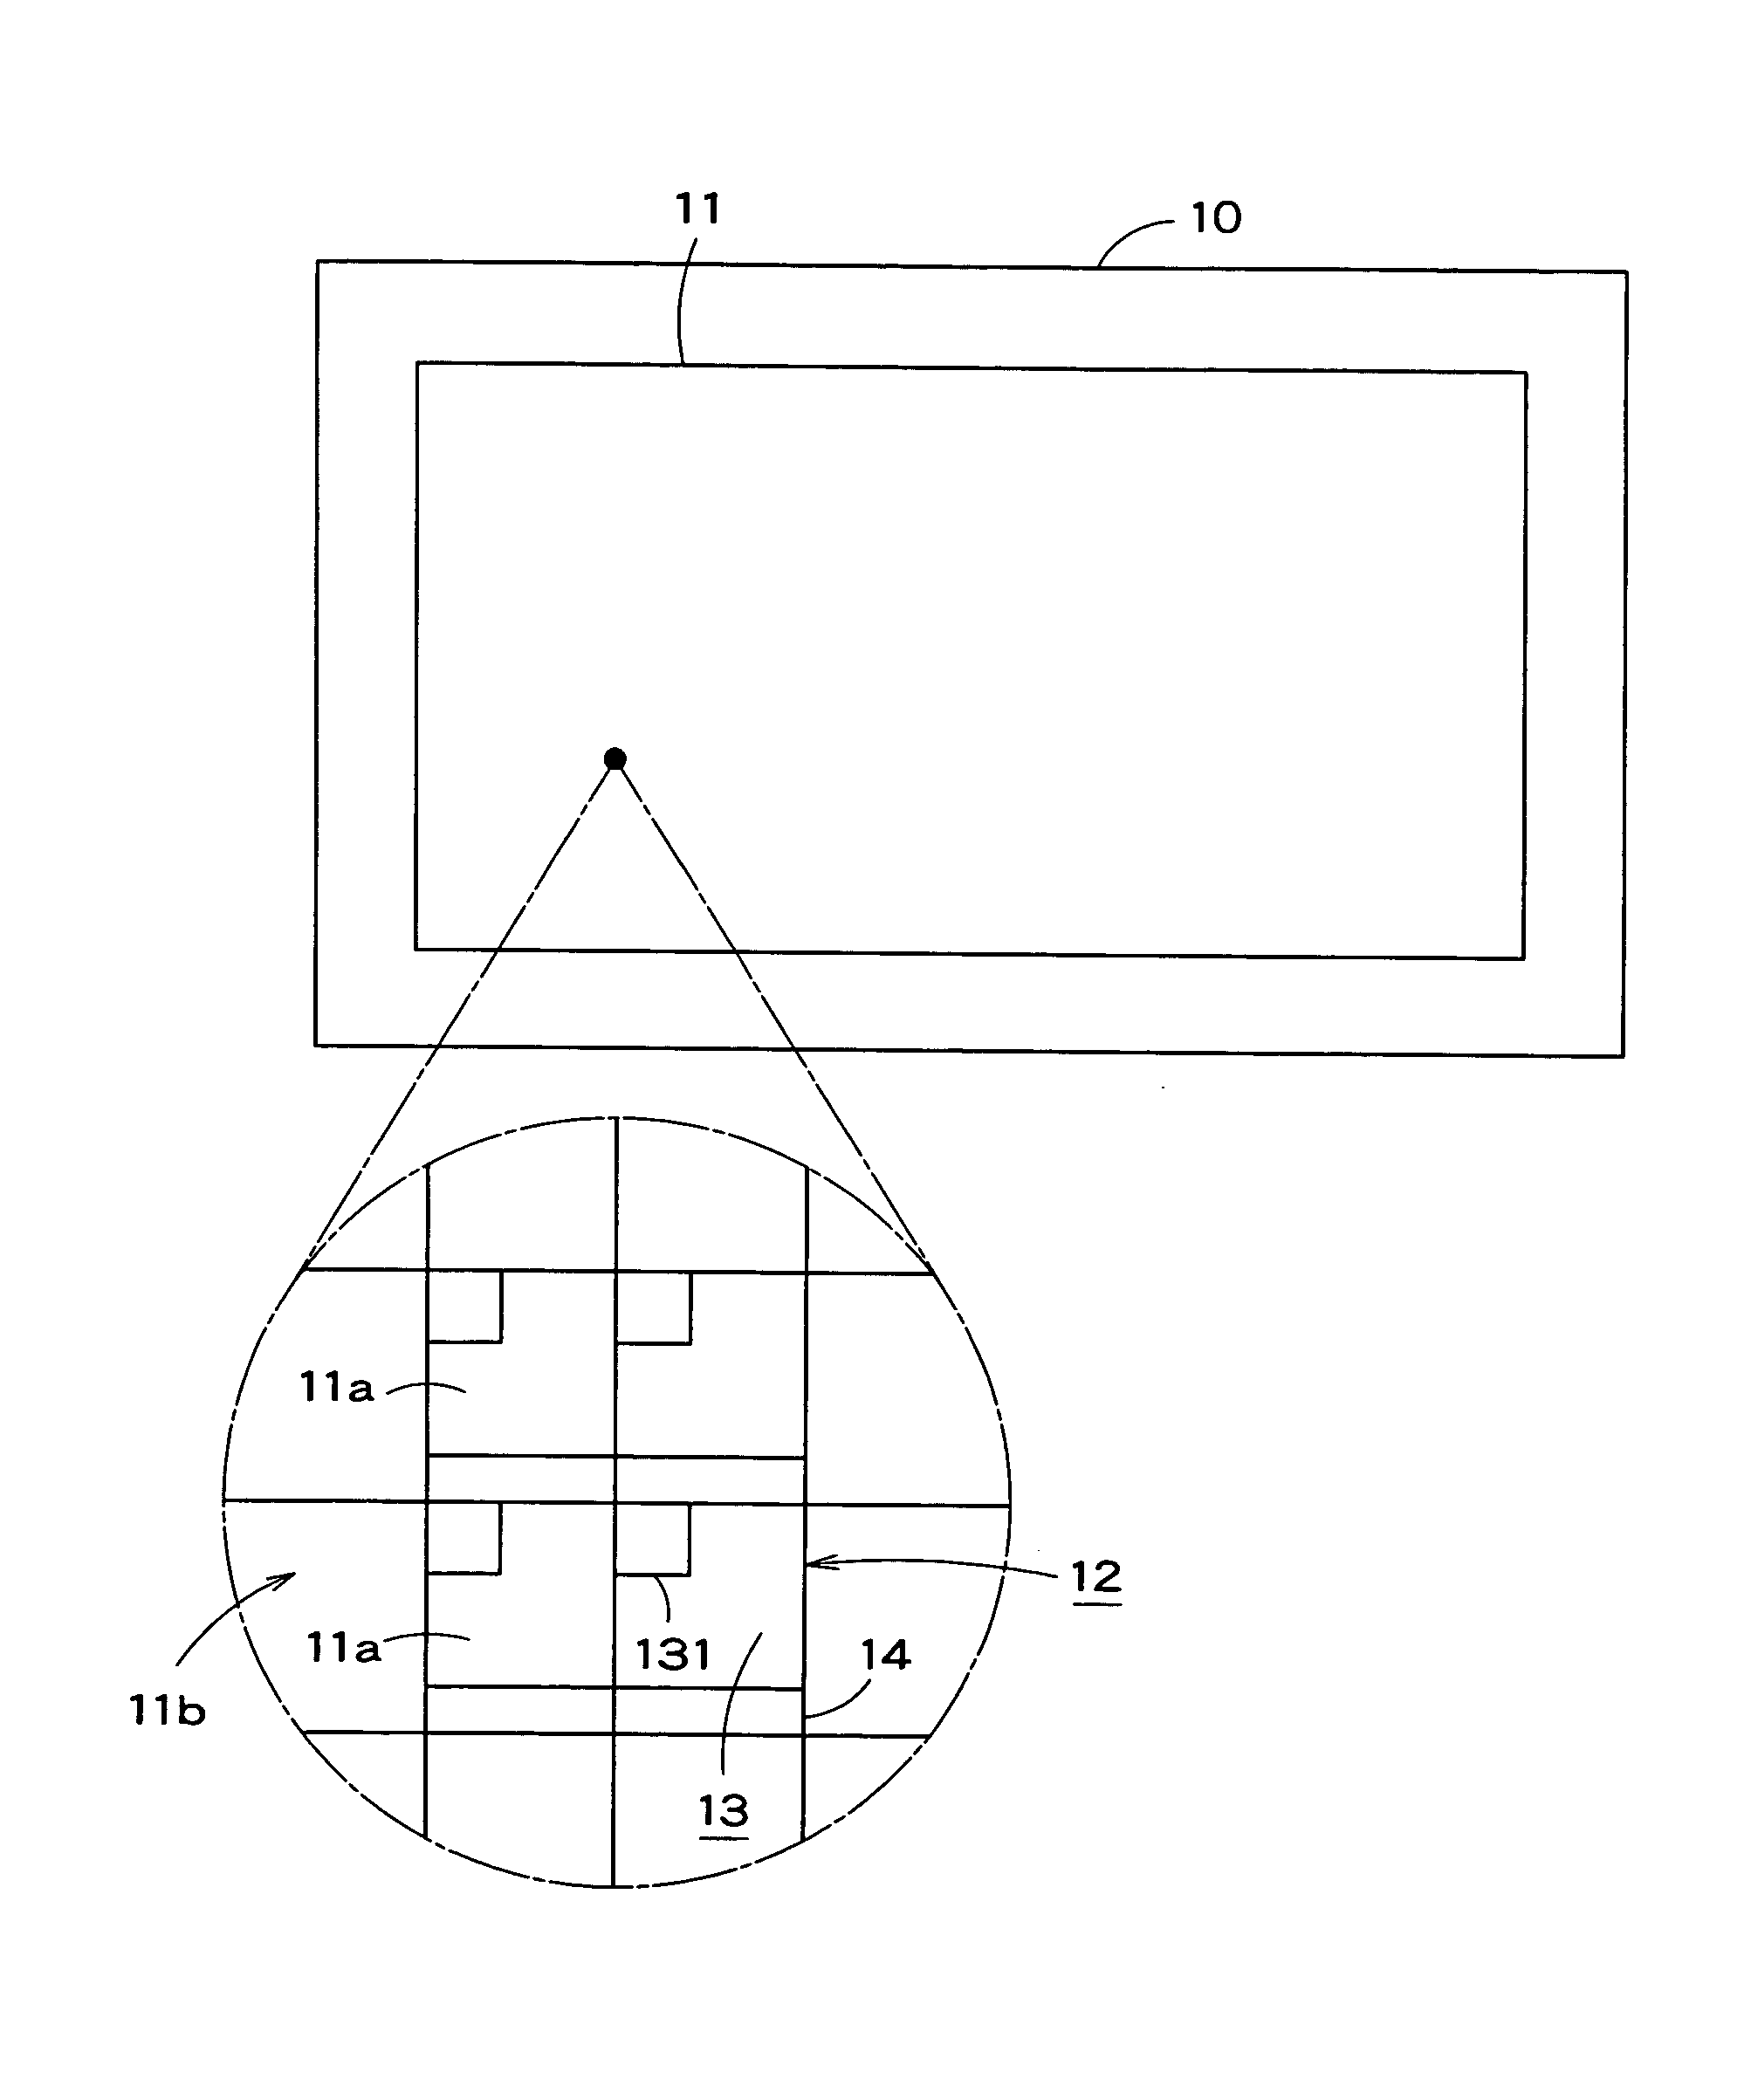 Display apparatus and display system